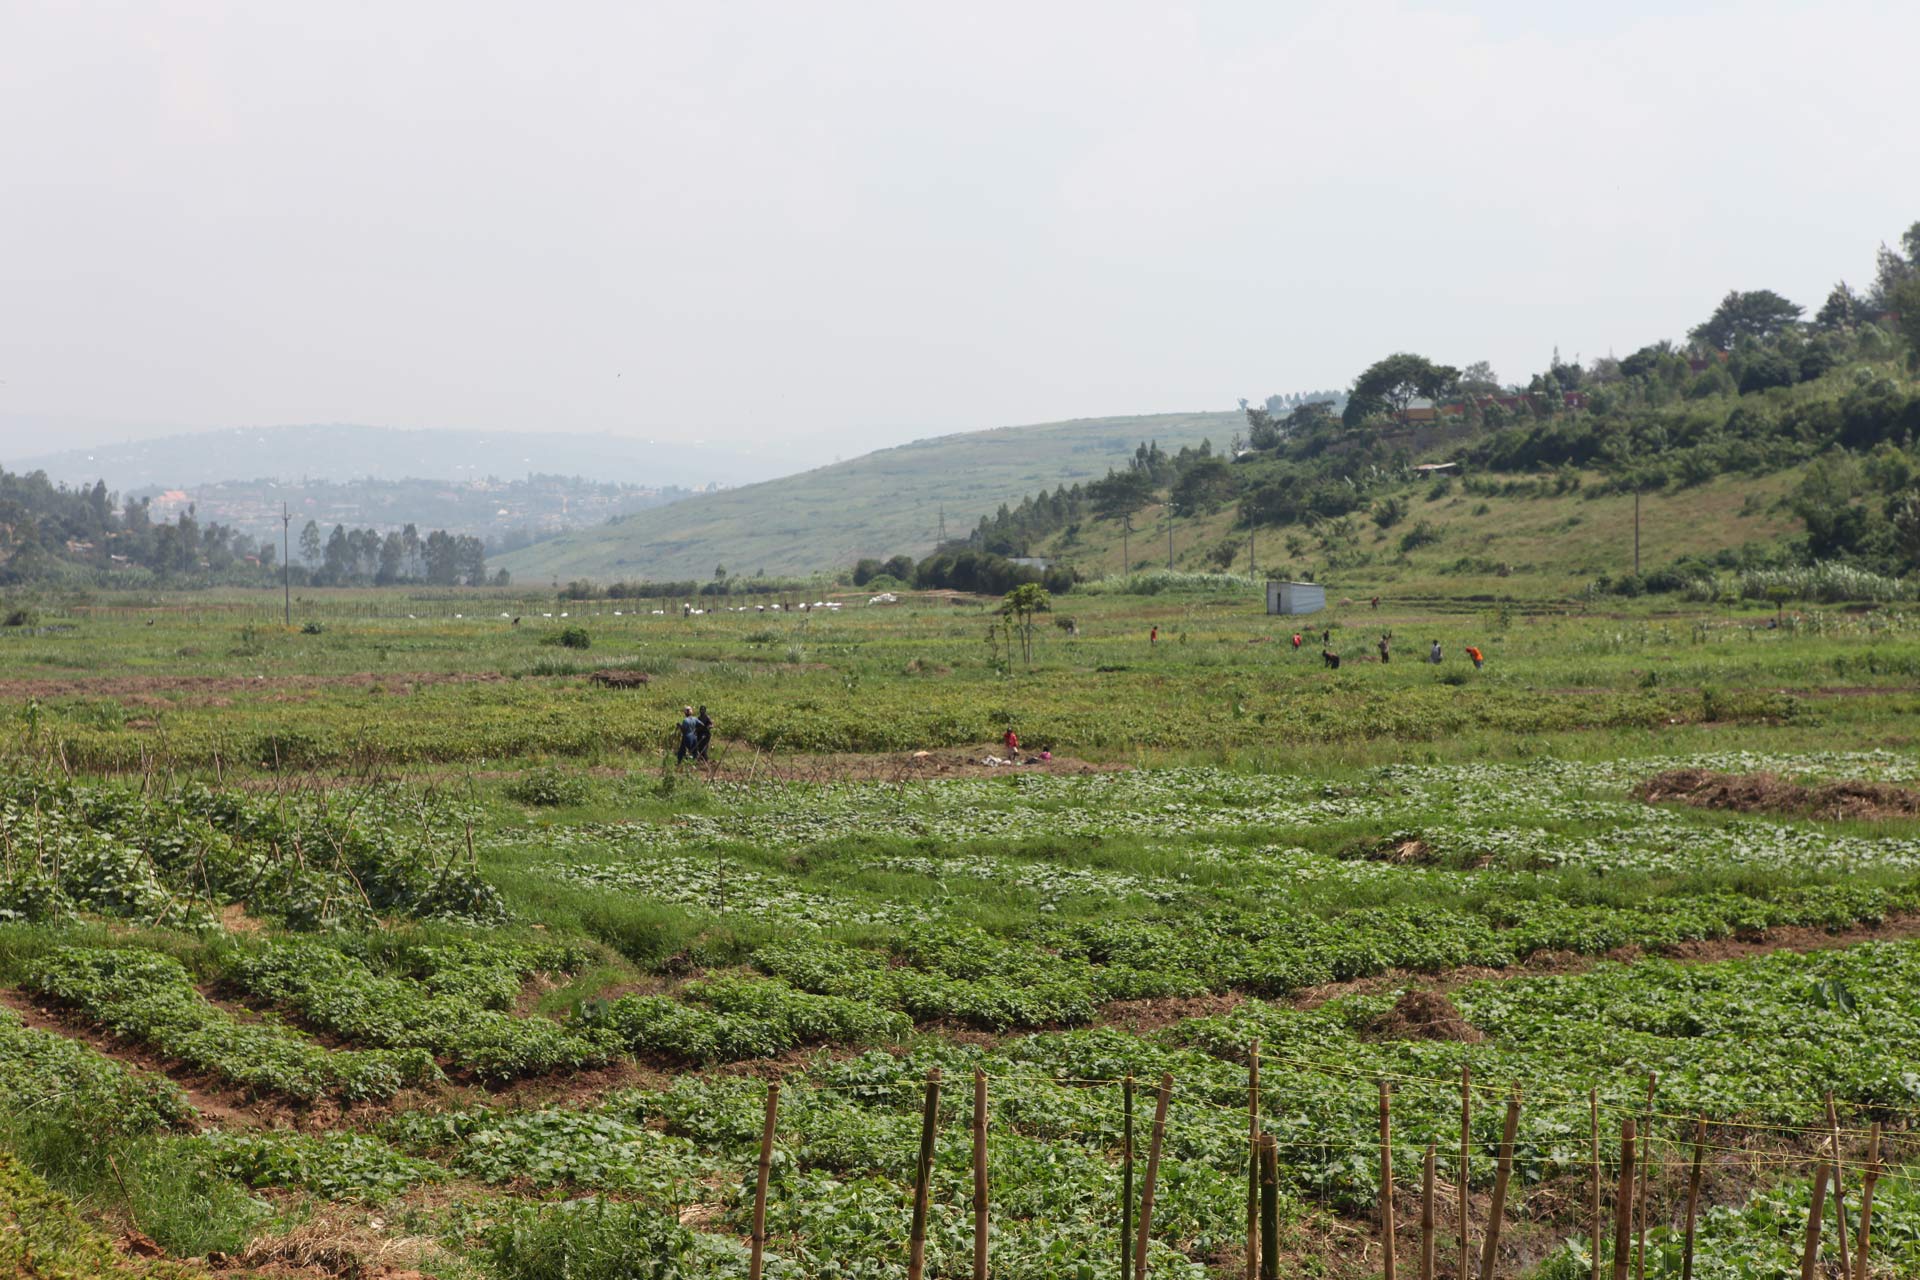 kinyinya-hill-kigali-the-project-site-agricultural-fields